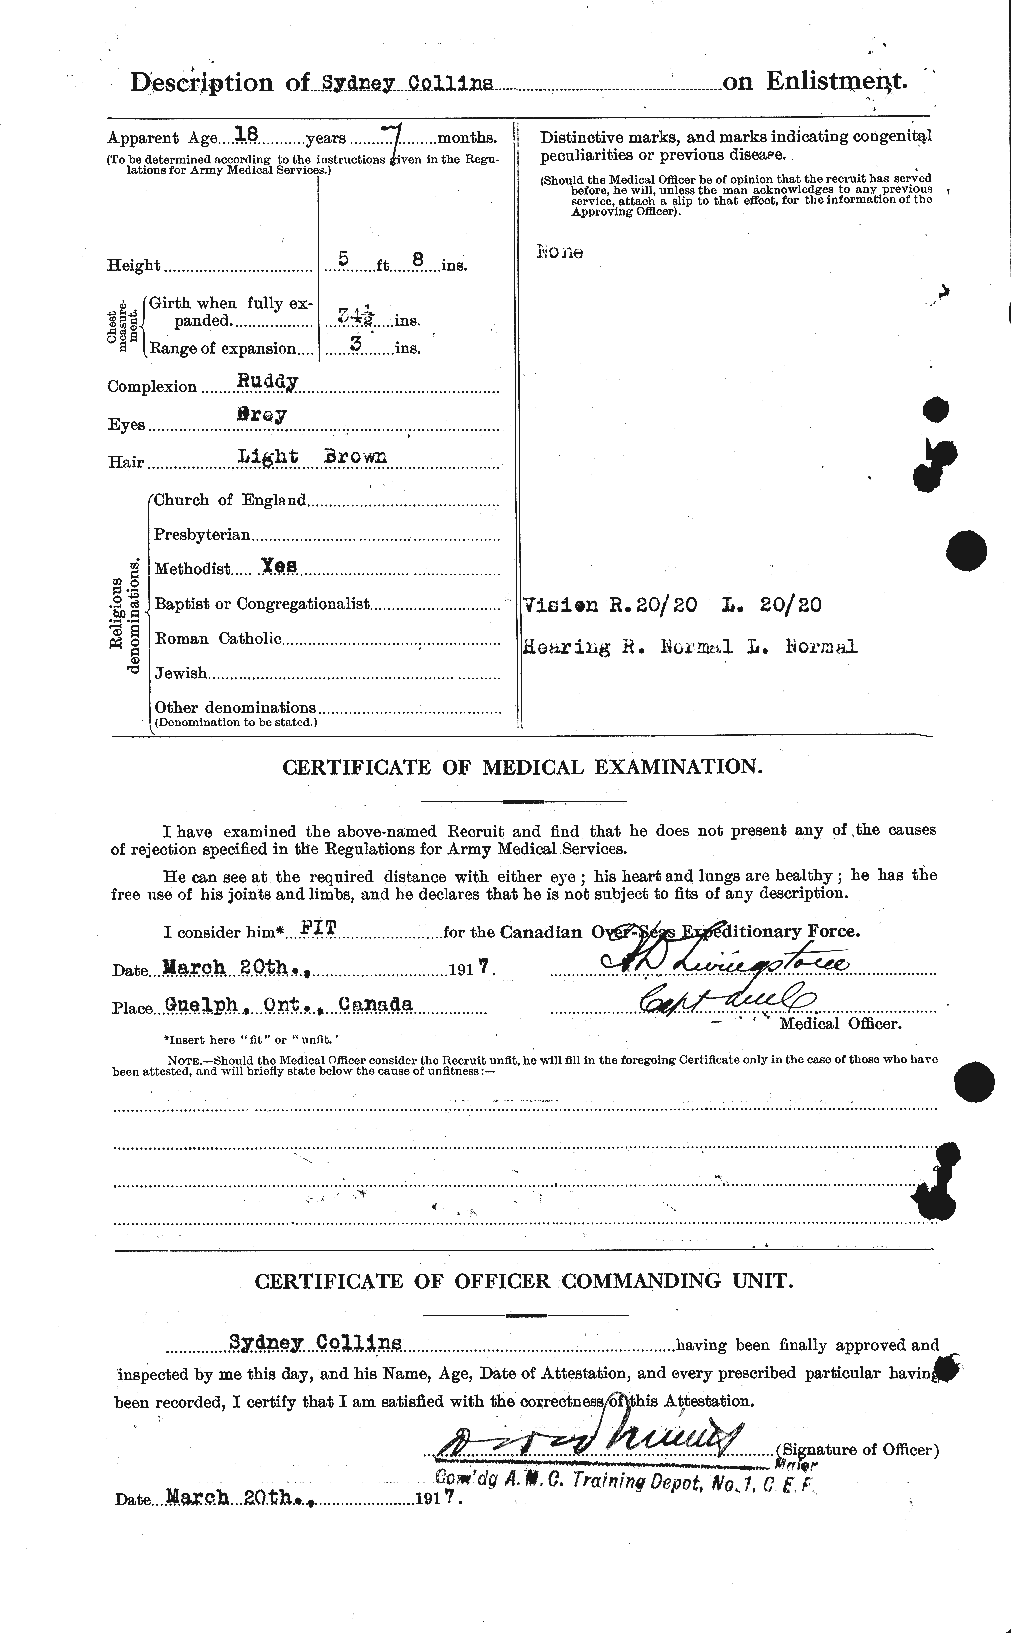 Personnel Records of the First World War - CEF 069148b